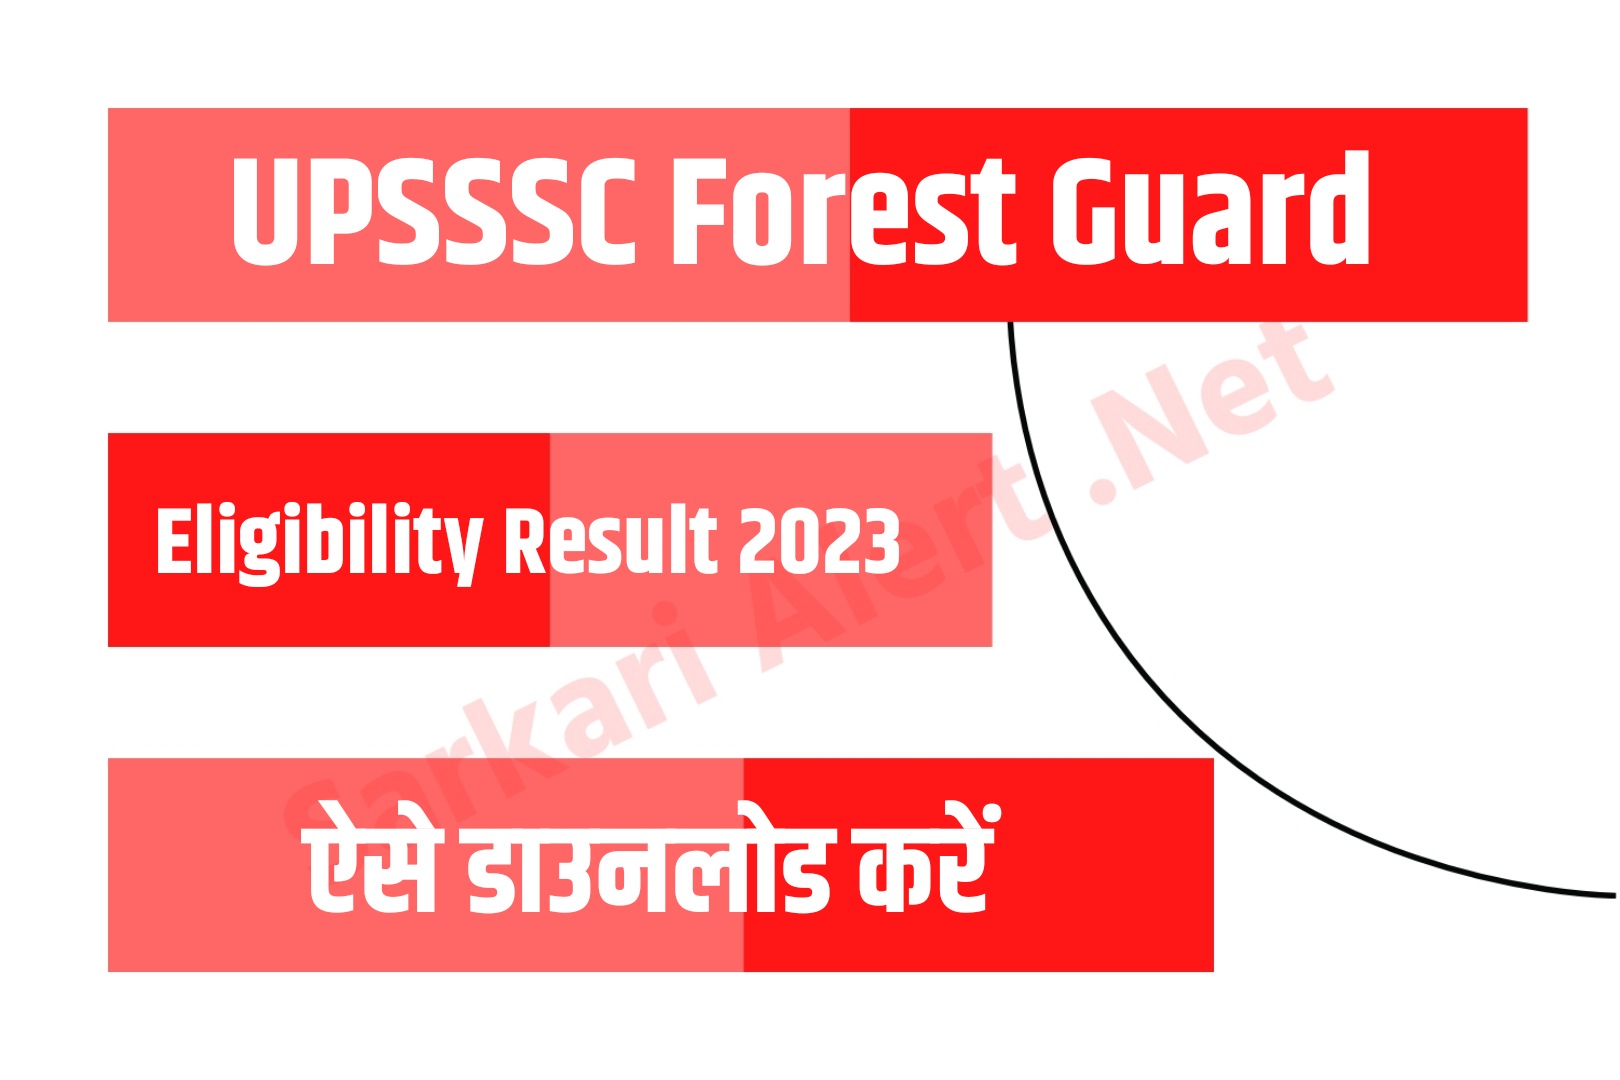 UPSSSC Forest Guard Eligibility Result 2023